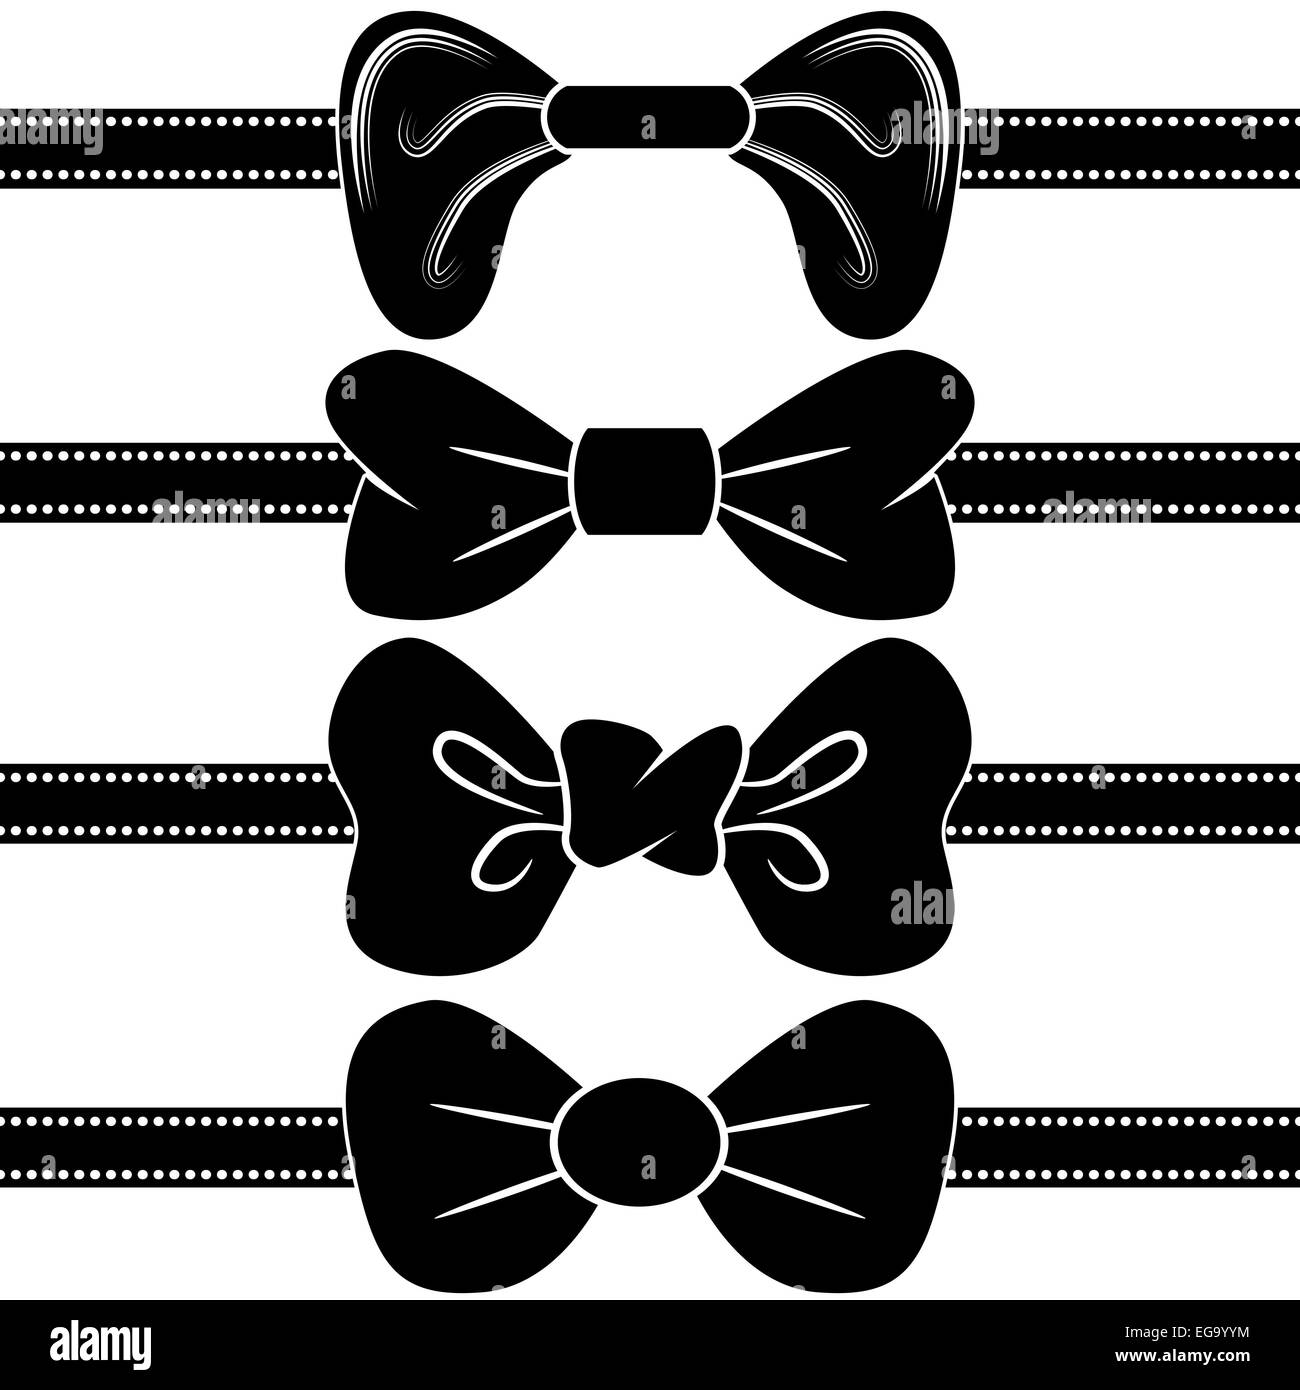 An image of a black bowtie set. Stock Photo